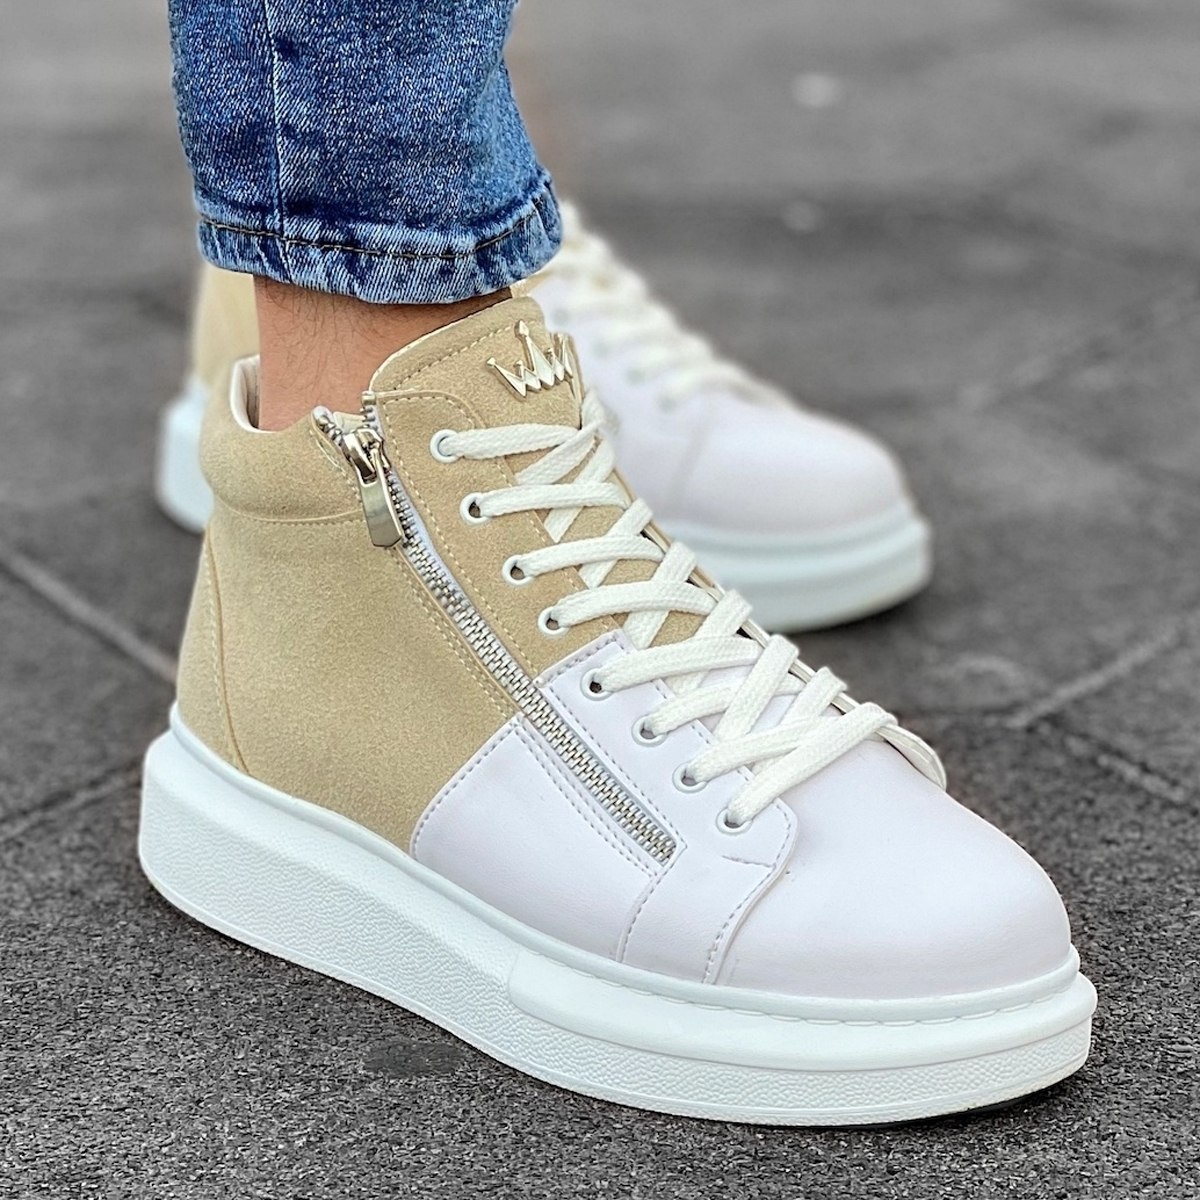 Hype Sole Zipped Style High Top Sneakers in Cream-White - 1